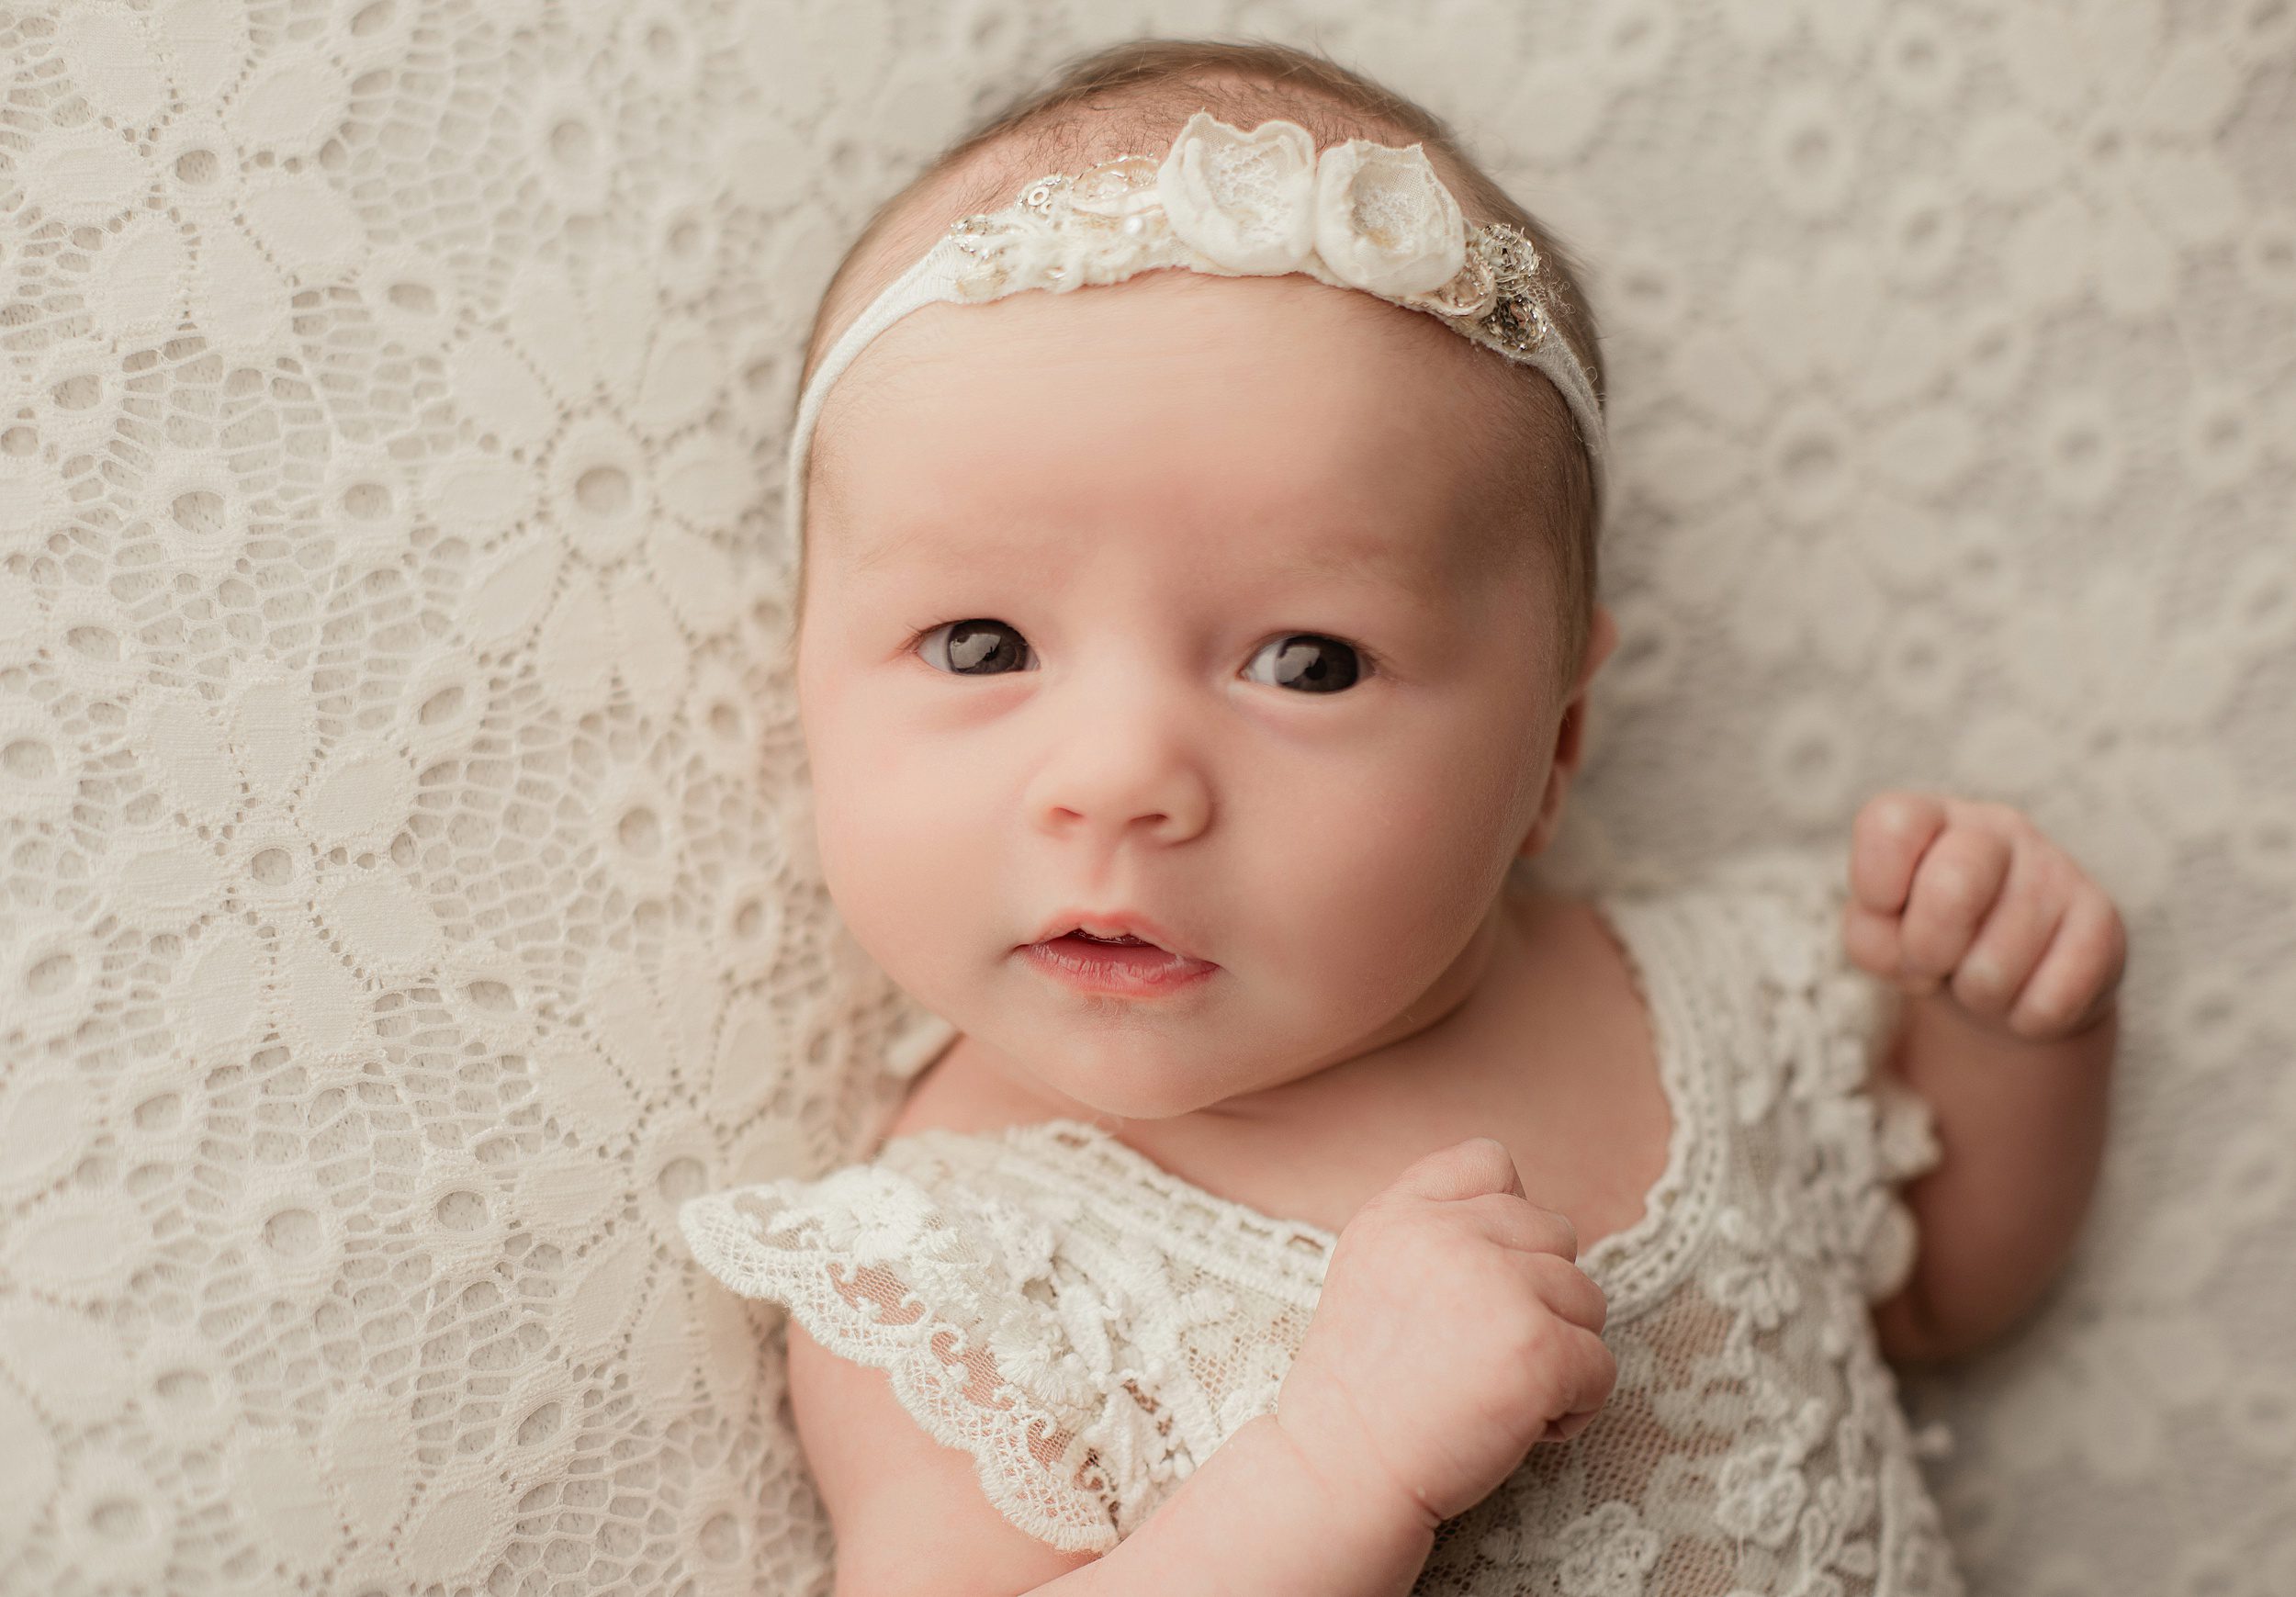 A newborn baby girl lays on her back in a lace dress and white floral headband